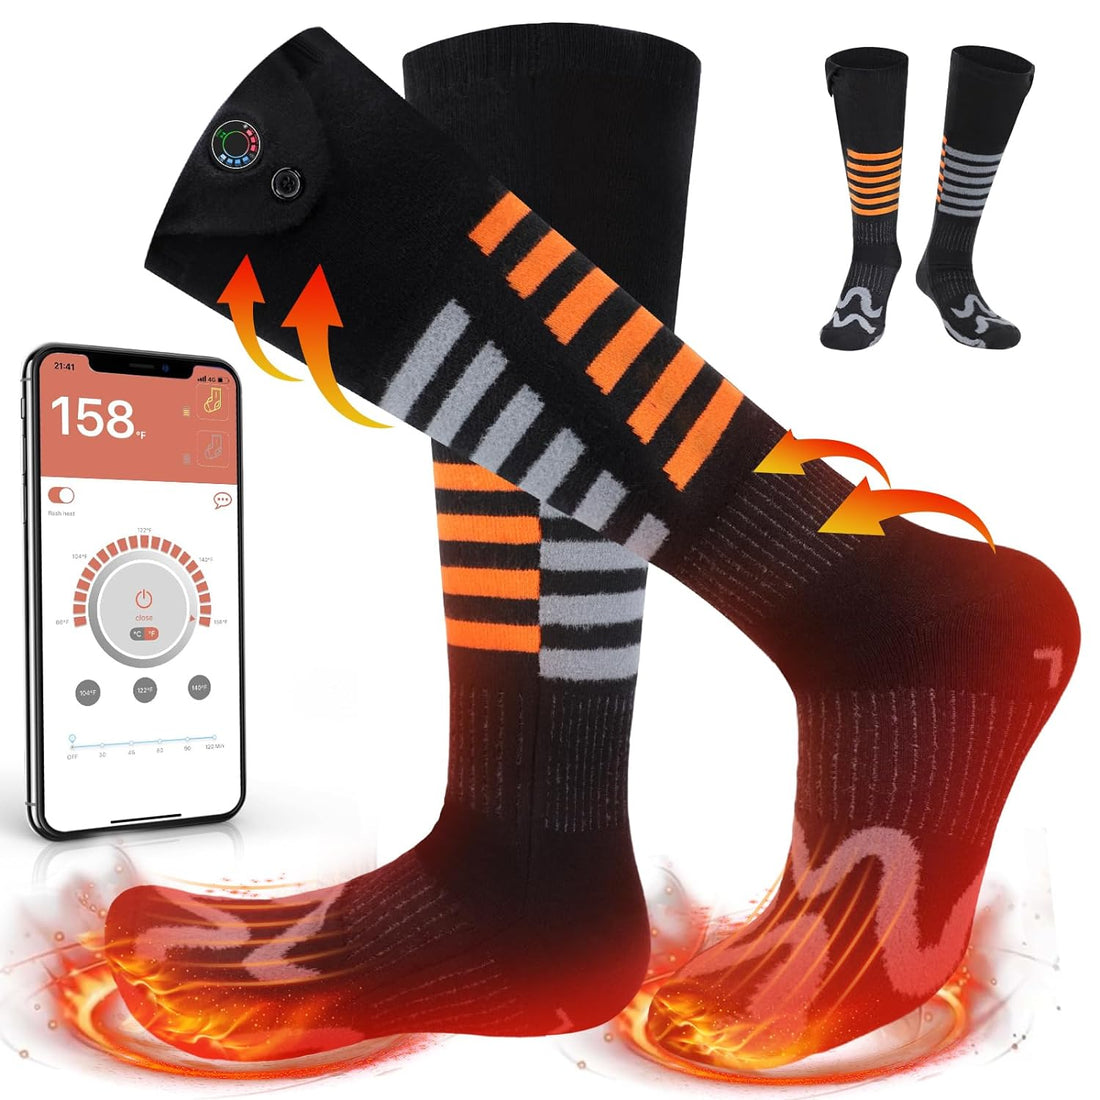 Heated Socks, Rechargeable Heated Socks for Men Women - 7.4V/3000 mAh Battery Powered Electric Socks with APP Control, Washable Foot Warmer for Winter Hunting Skiing Camping Hiking